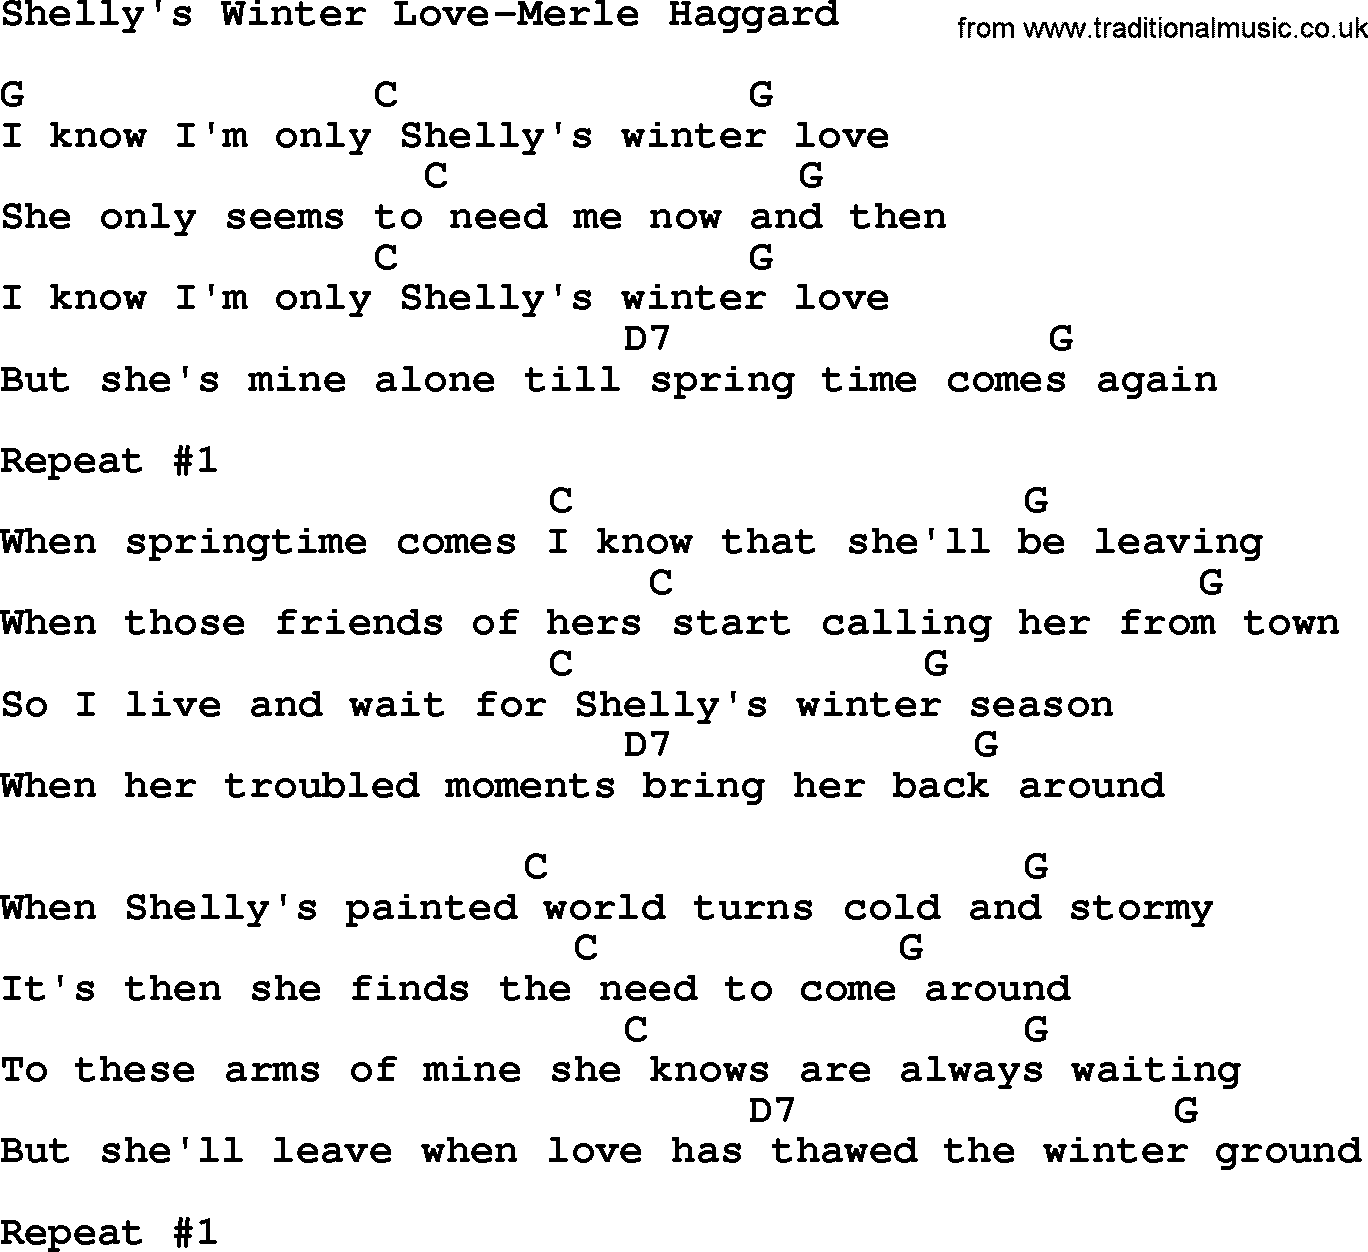 Country music song: Shelly's Winter Love-Merle Haggard lyrics and chords